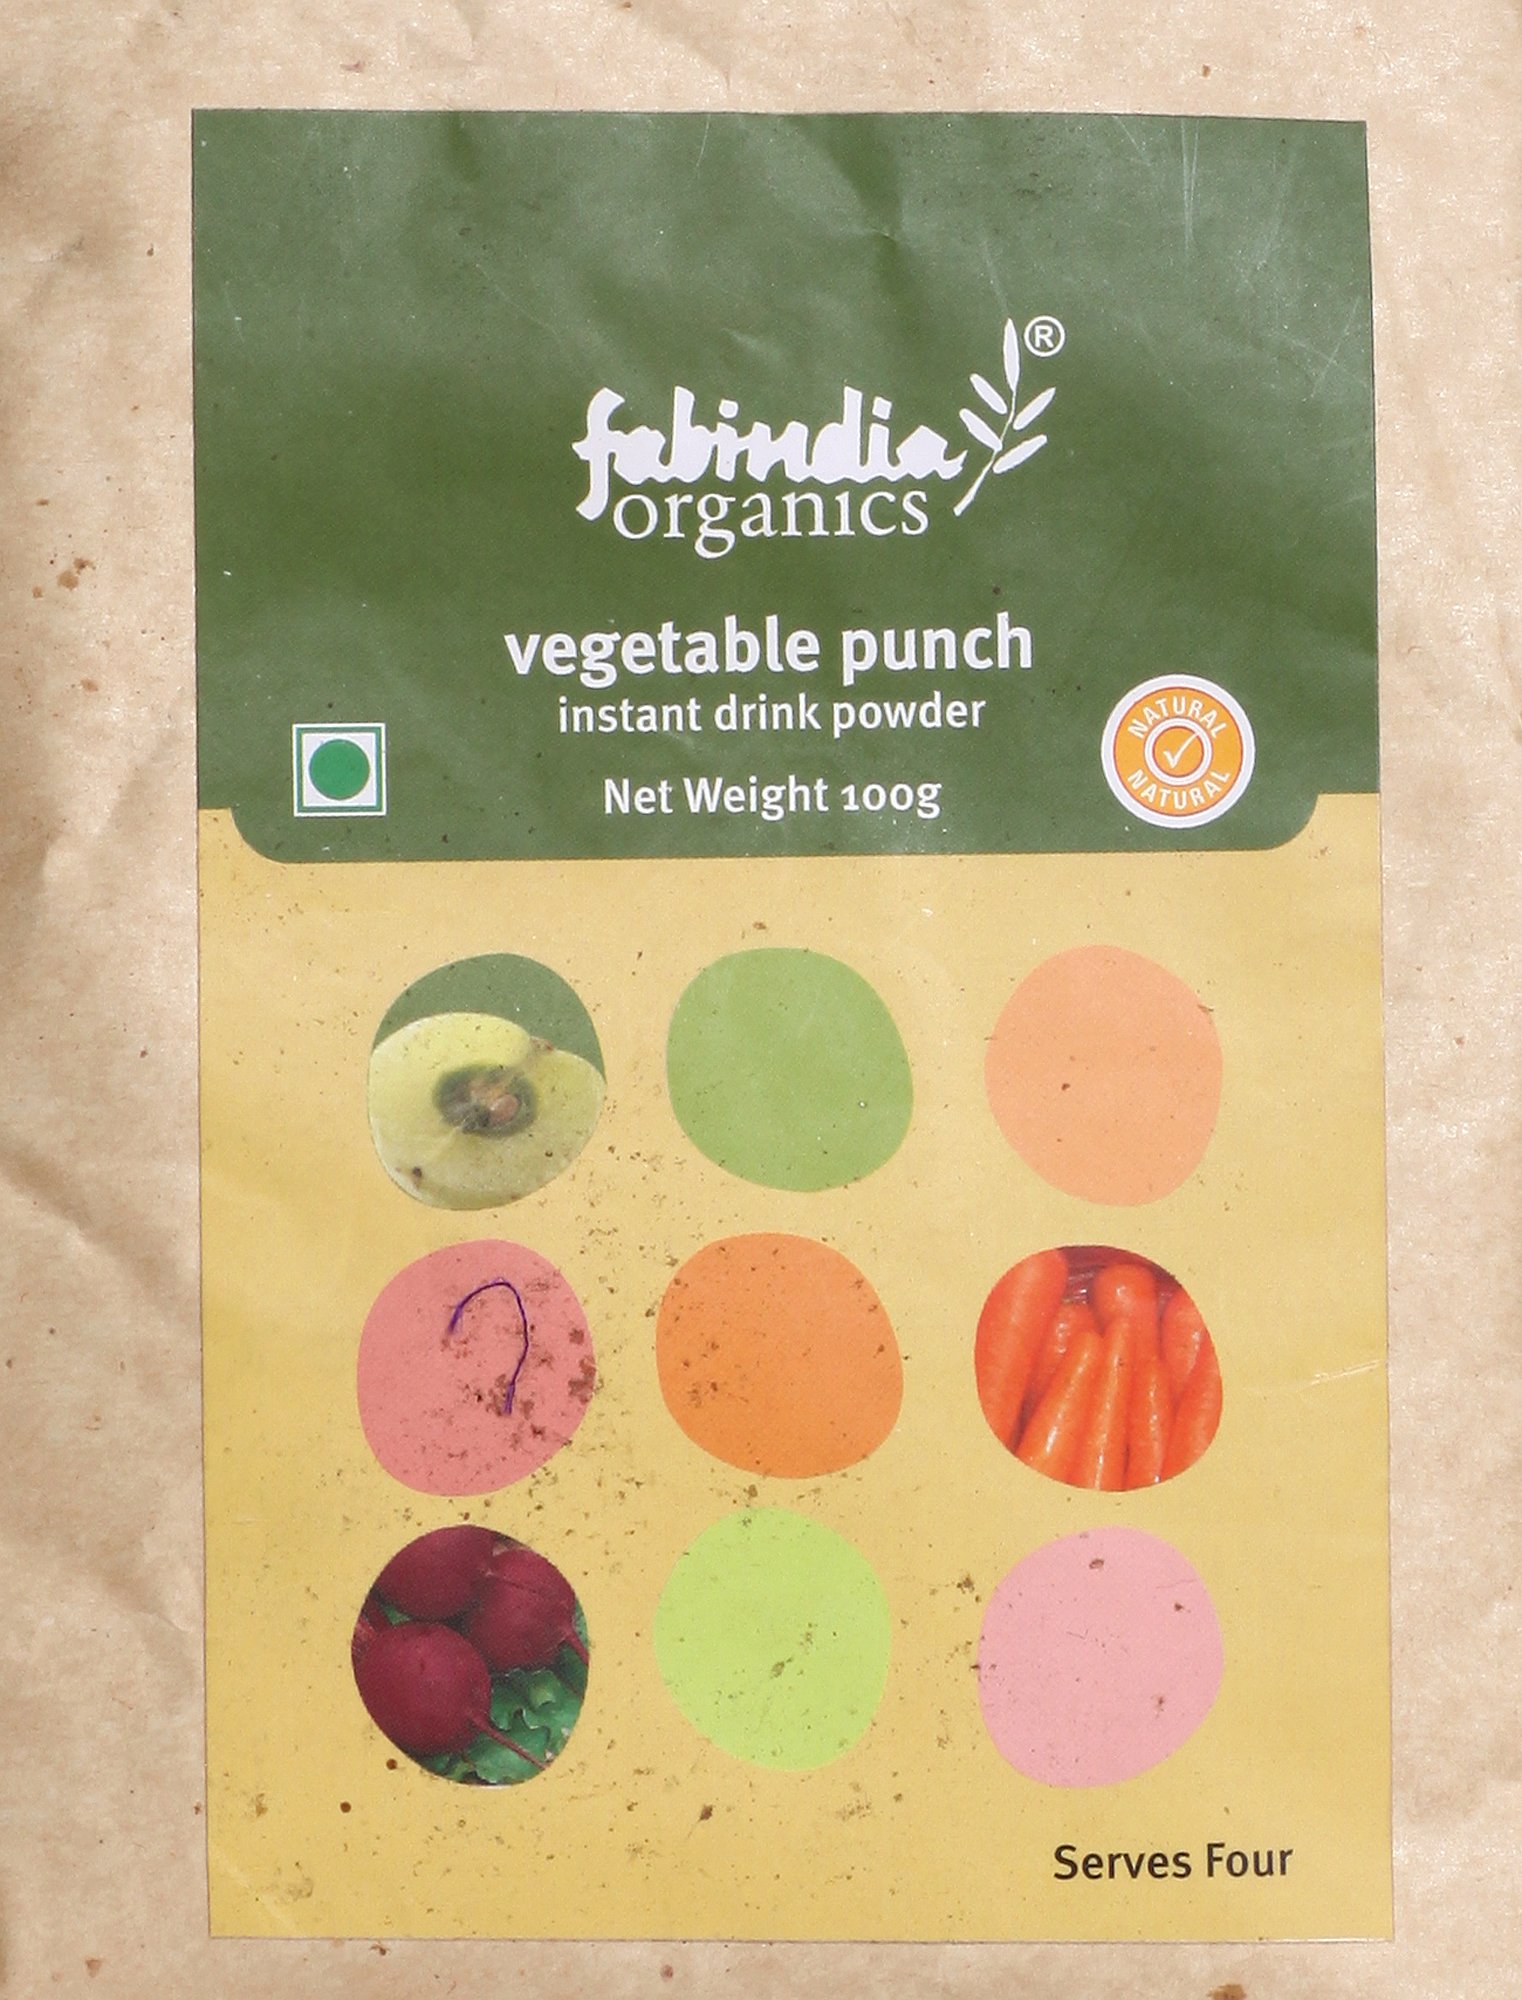 Fabindia Organics Vegetable Puch Instant Drink Powder - book cover